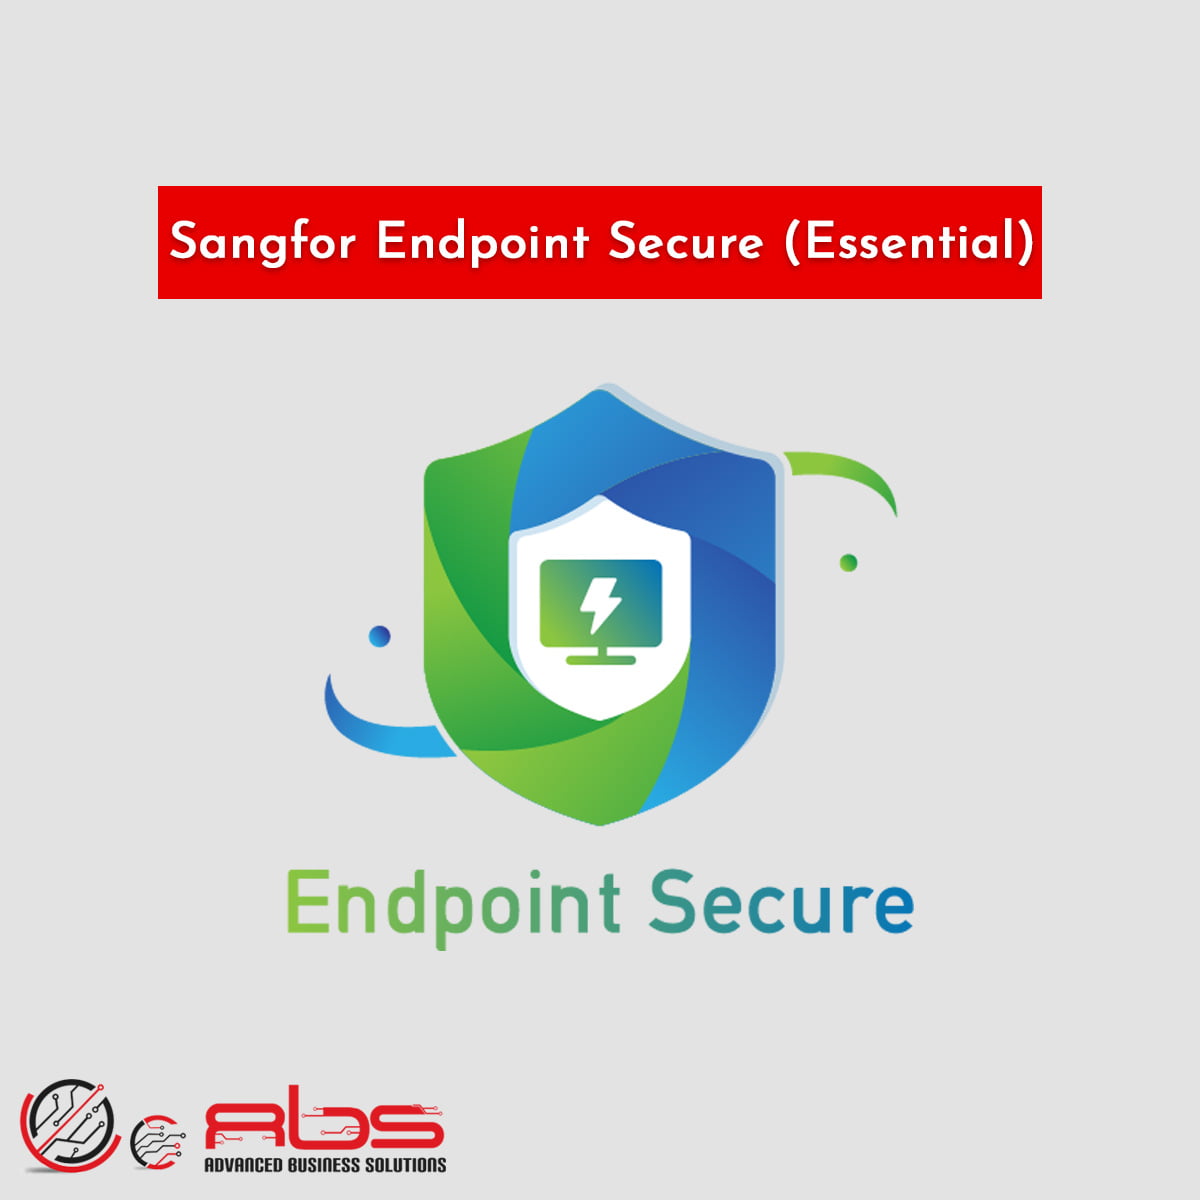 Sangfor Endpoint Secure (Essential)